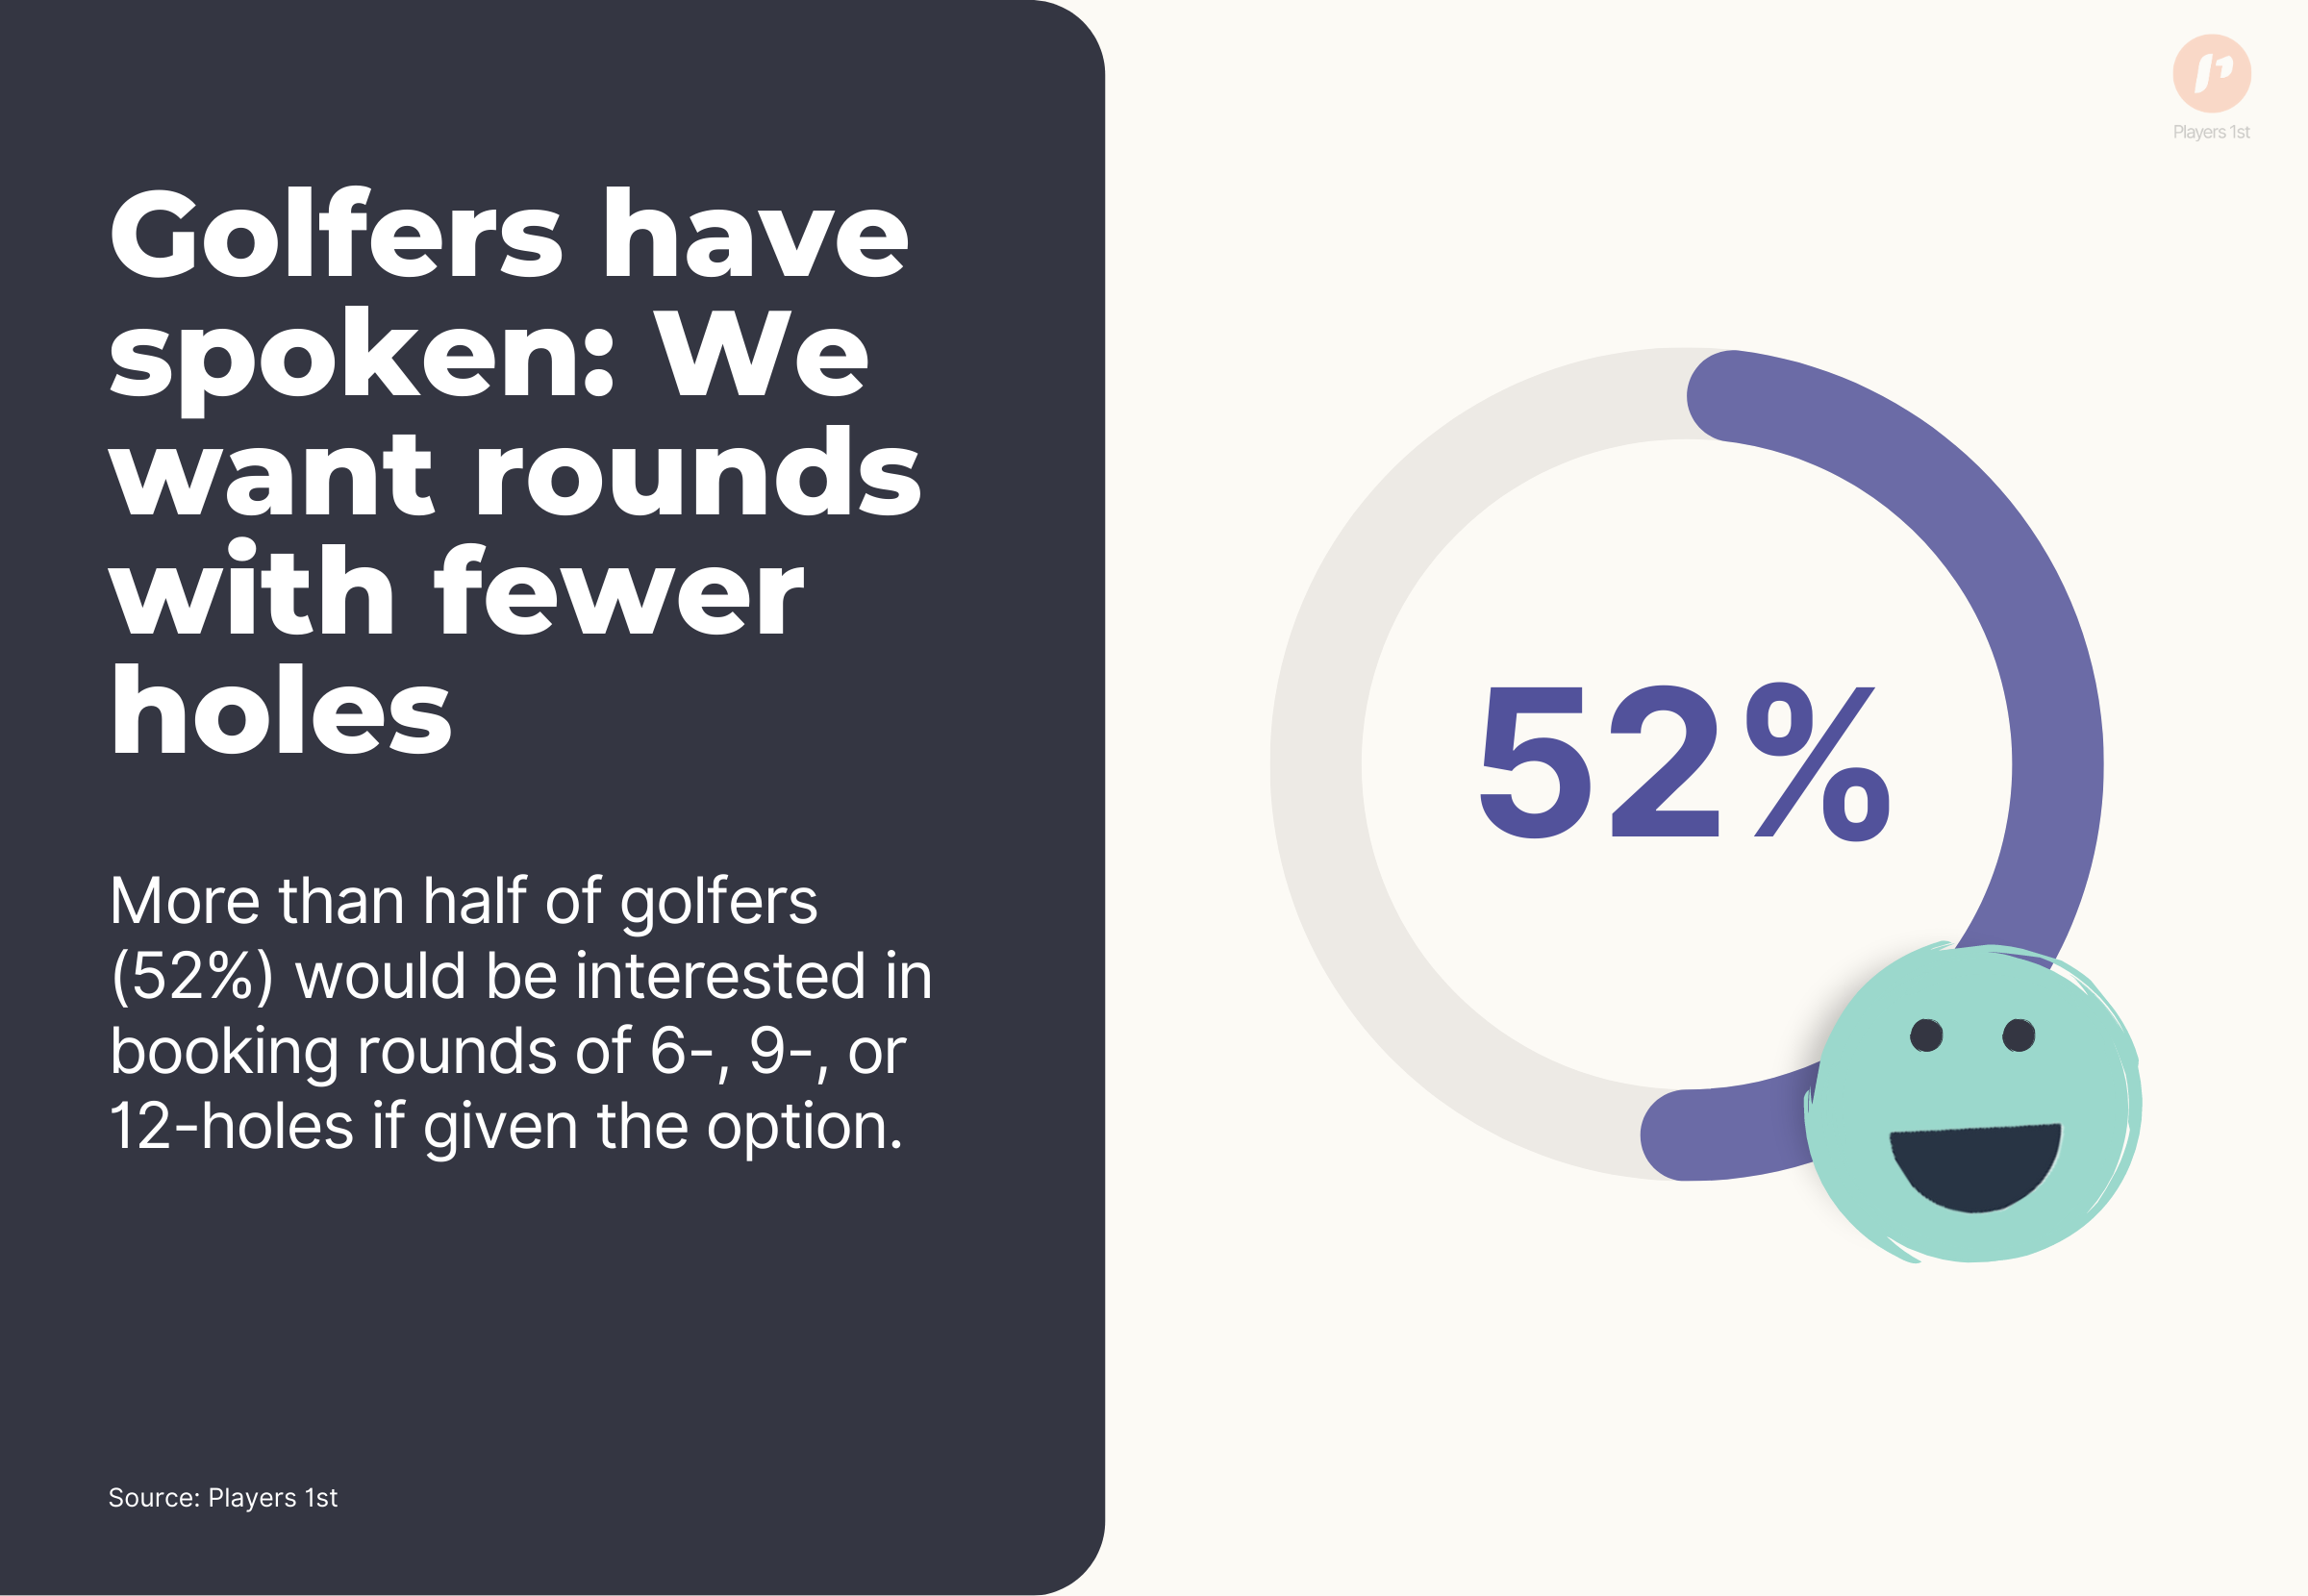 Golfers perception of rounds with fewer holes.